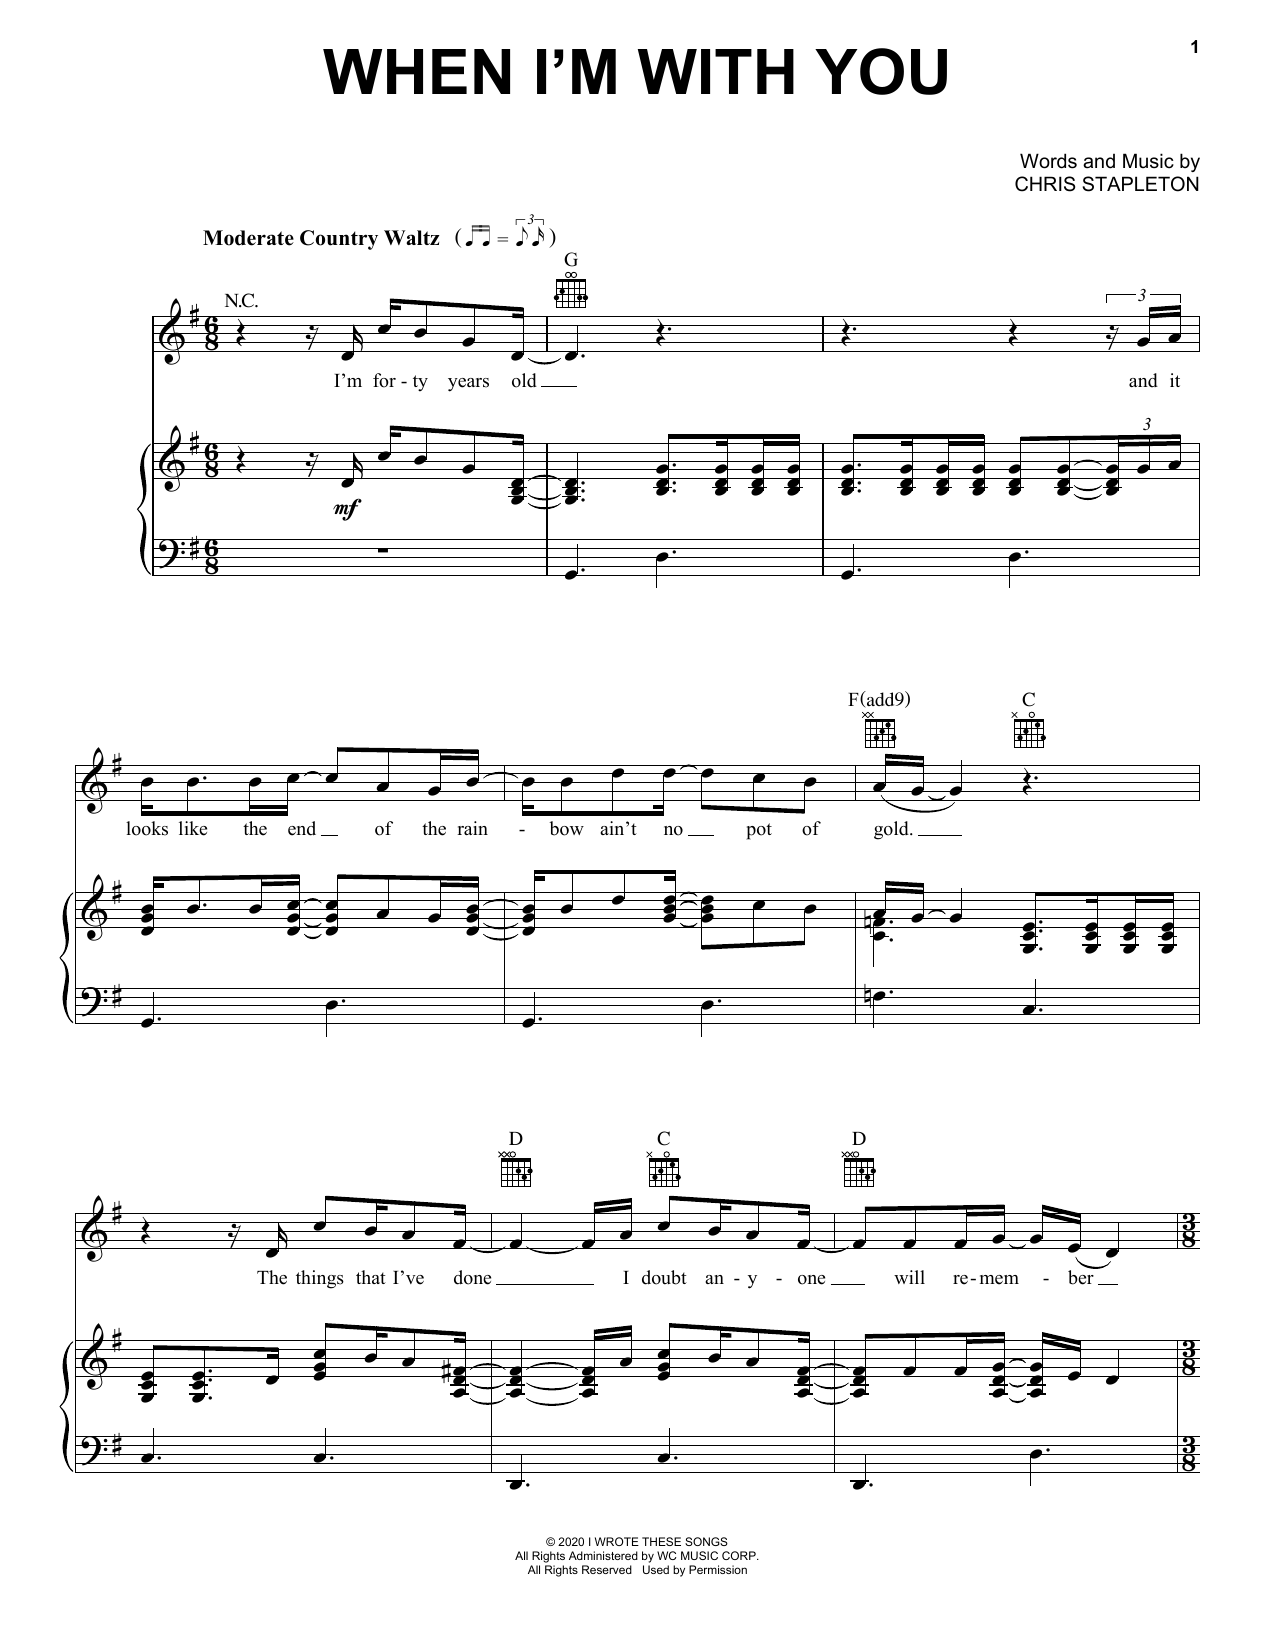 Download Chris Stapleton When I'm With You Sheet Music